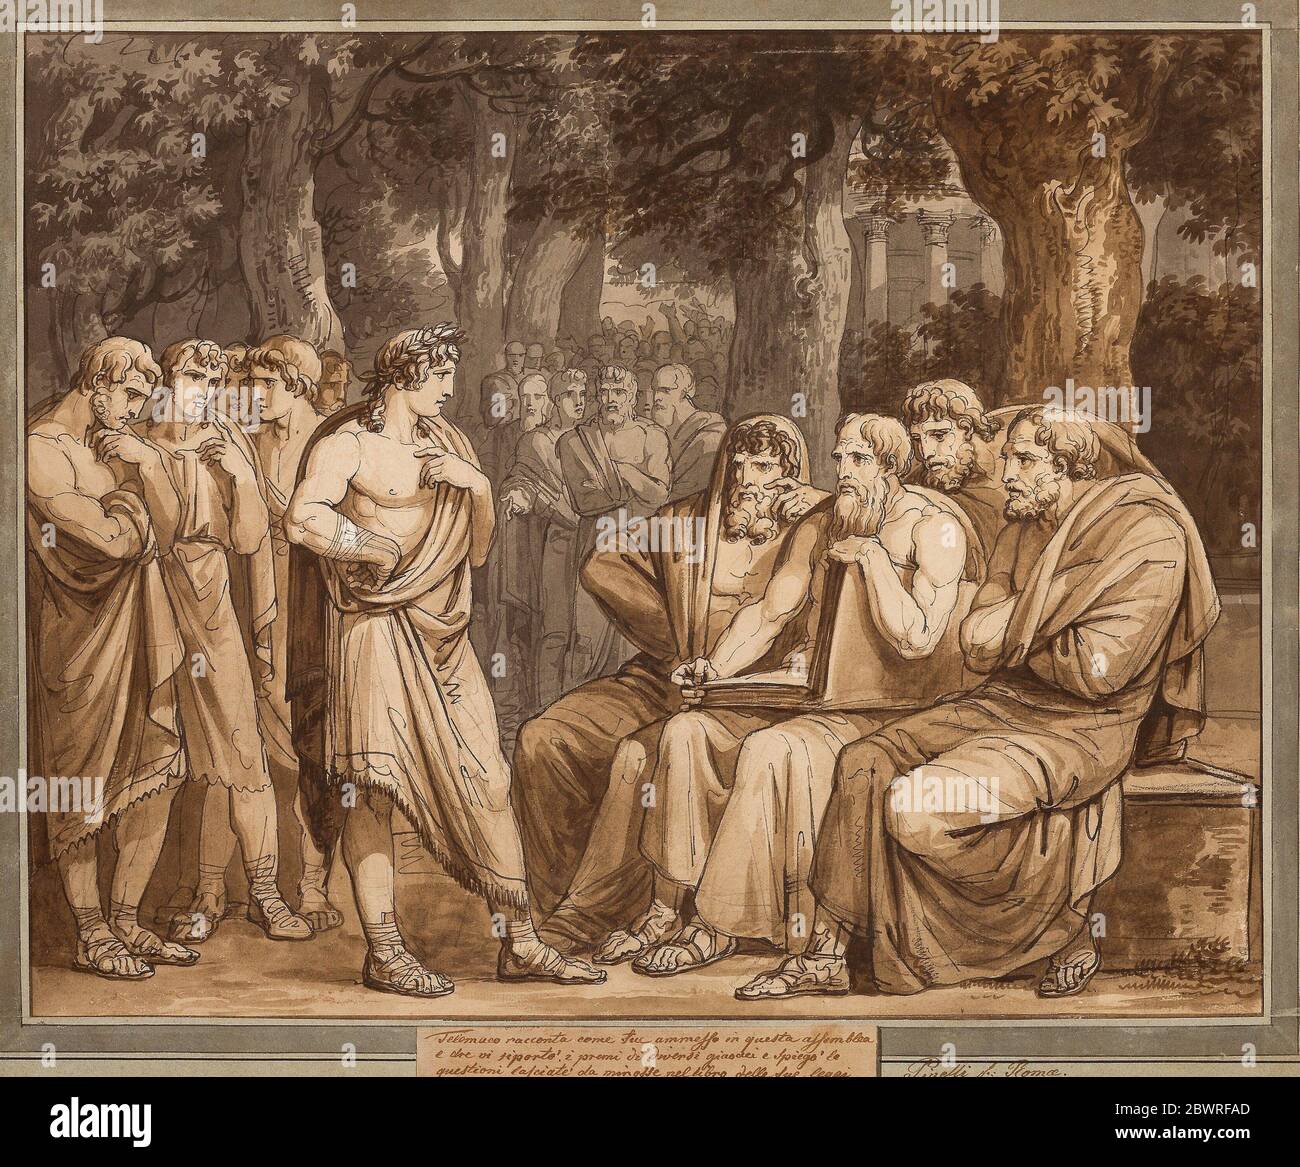 Author: Bartolomeo Pinelli. Telemachus Describes How He Was Admitted into the Assembly in Crete, from The Adventures of Telemachus, Book 5 - 1808 - Stock Photo